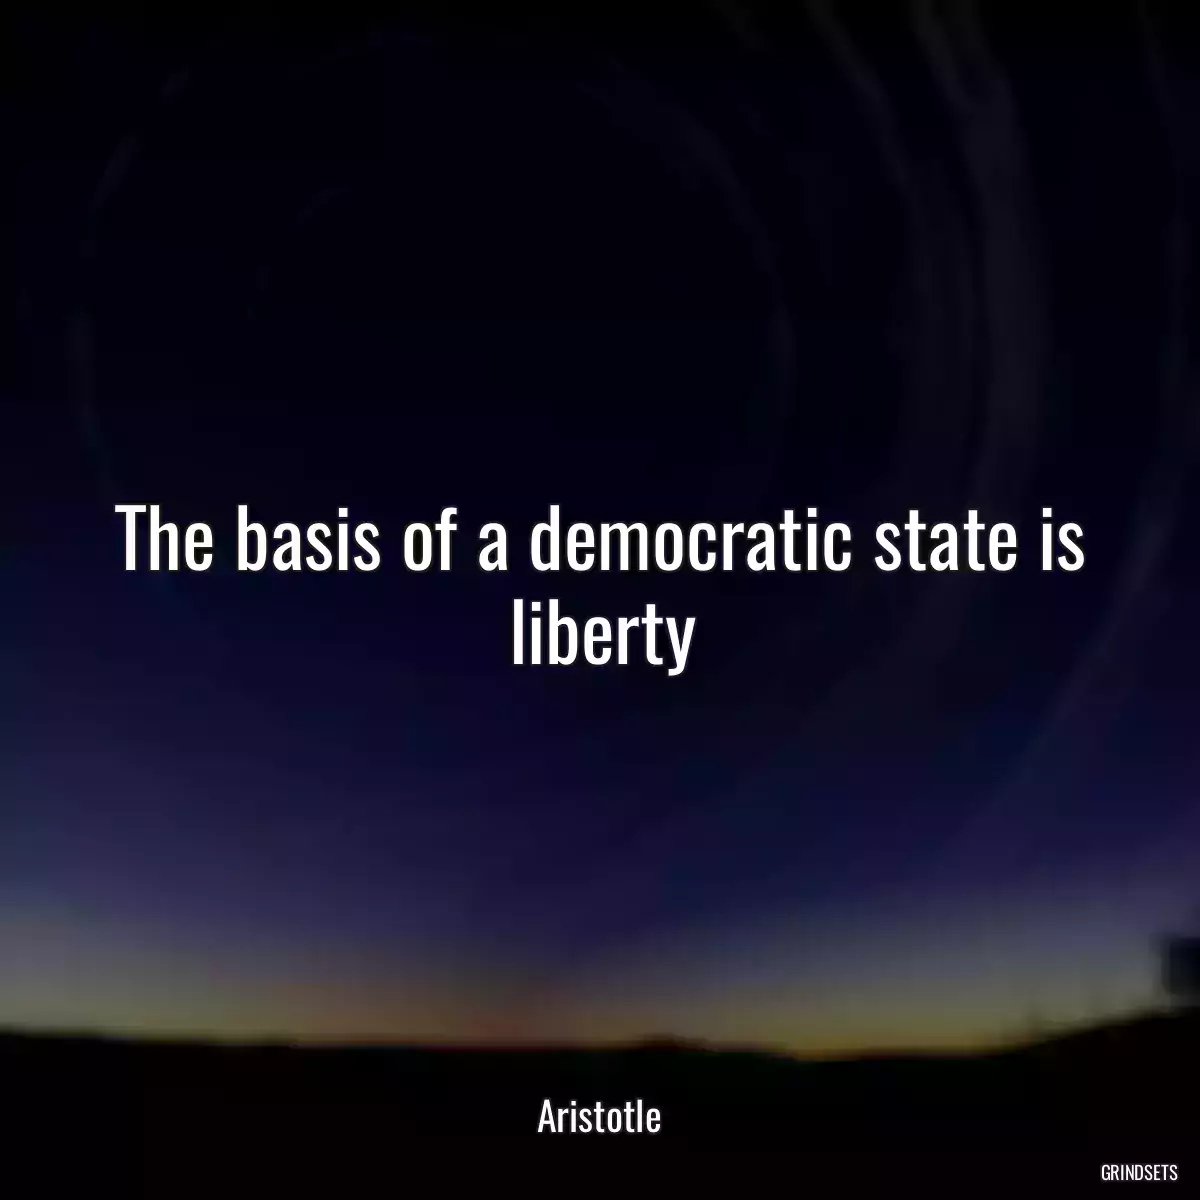 The basis of a democratic state is liberty